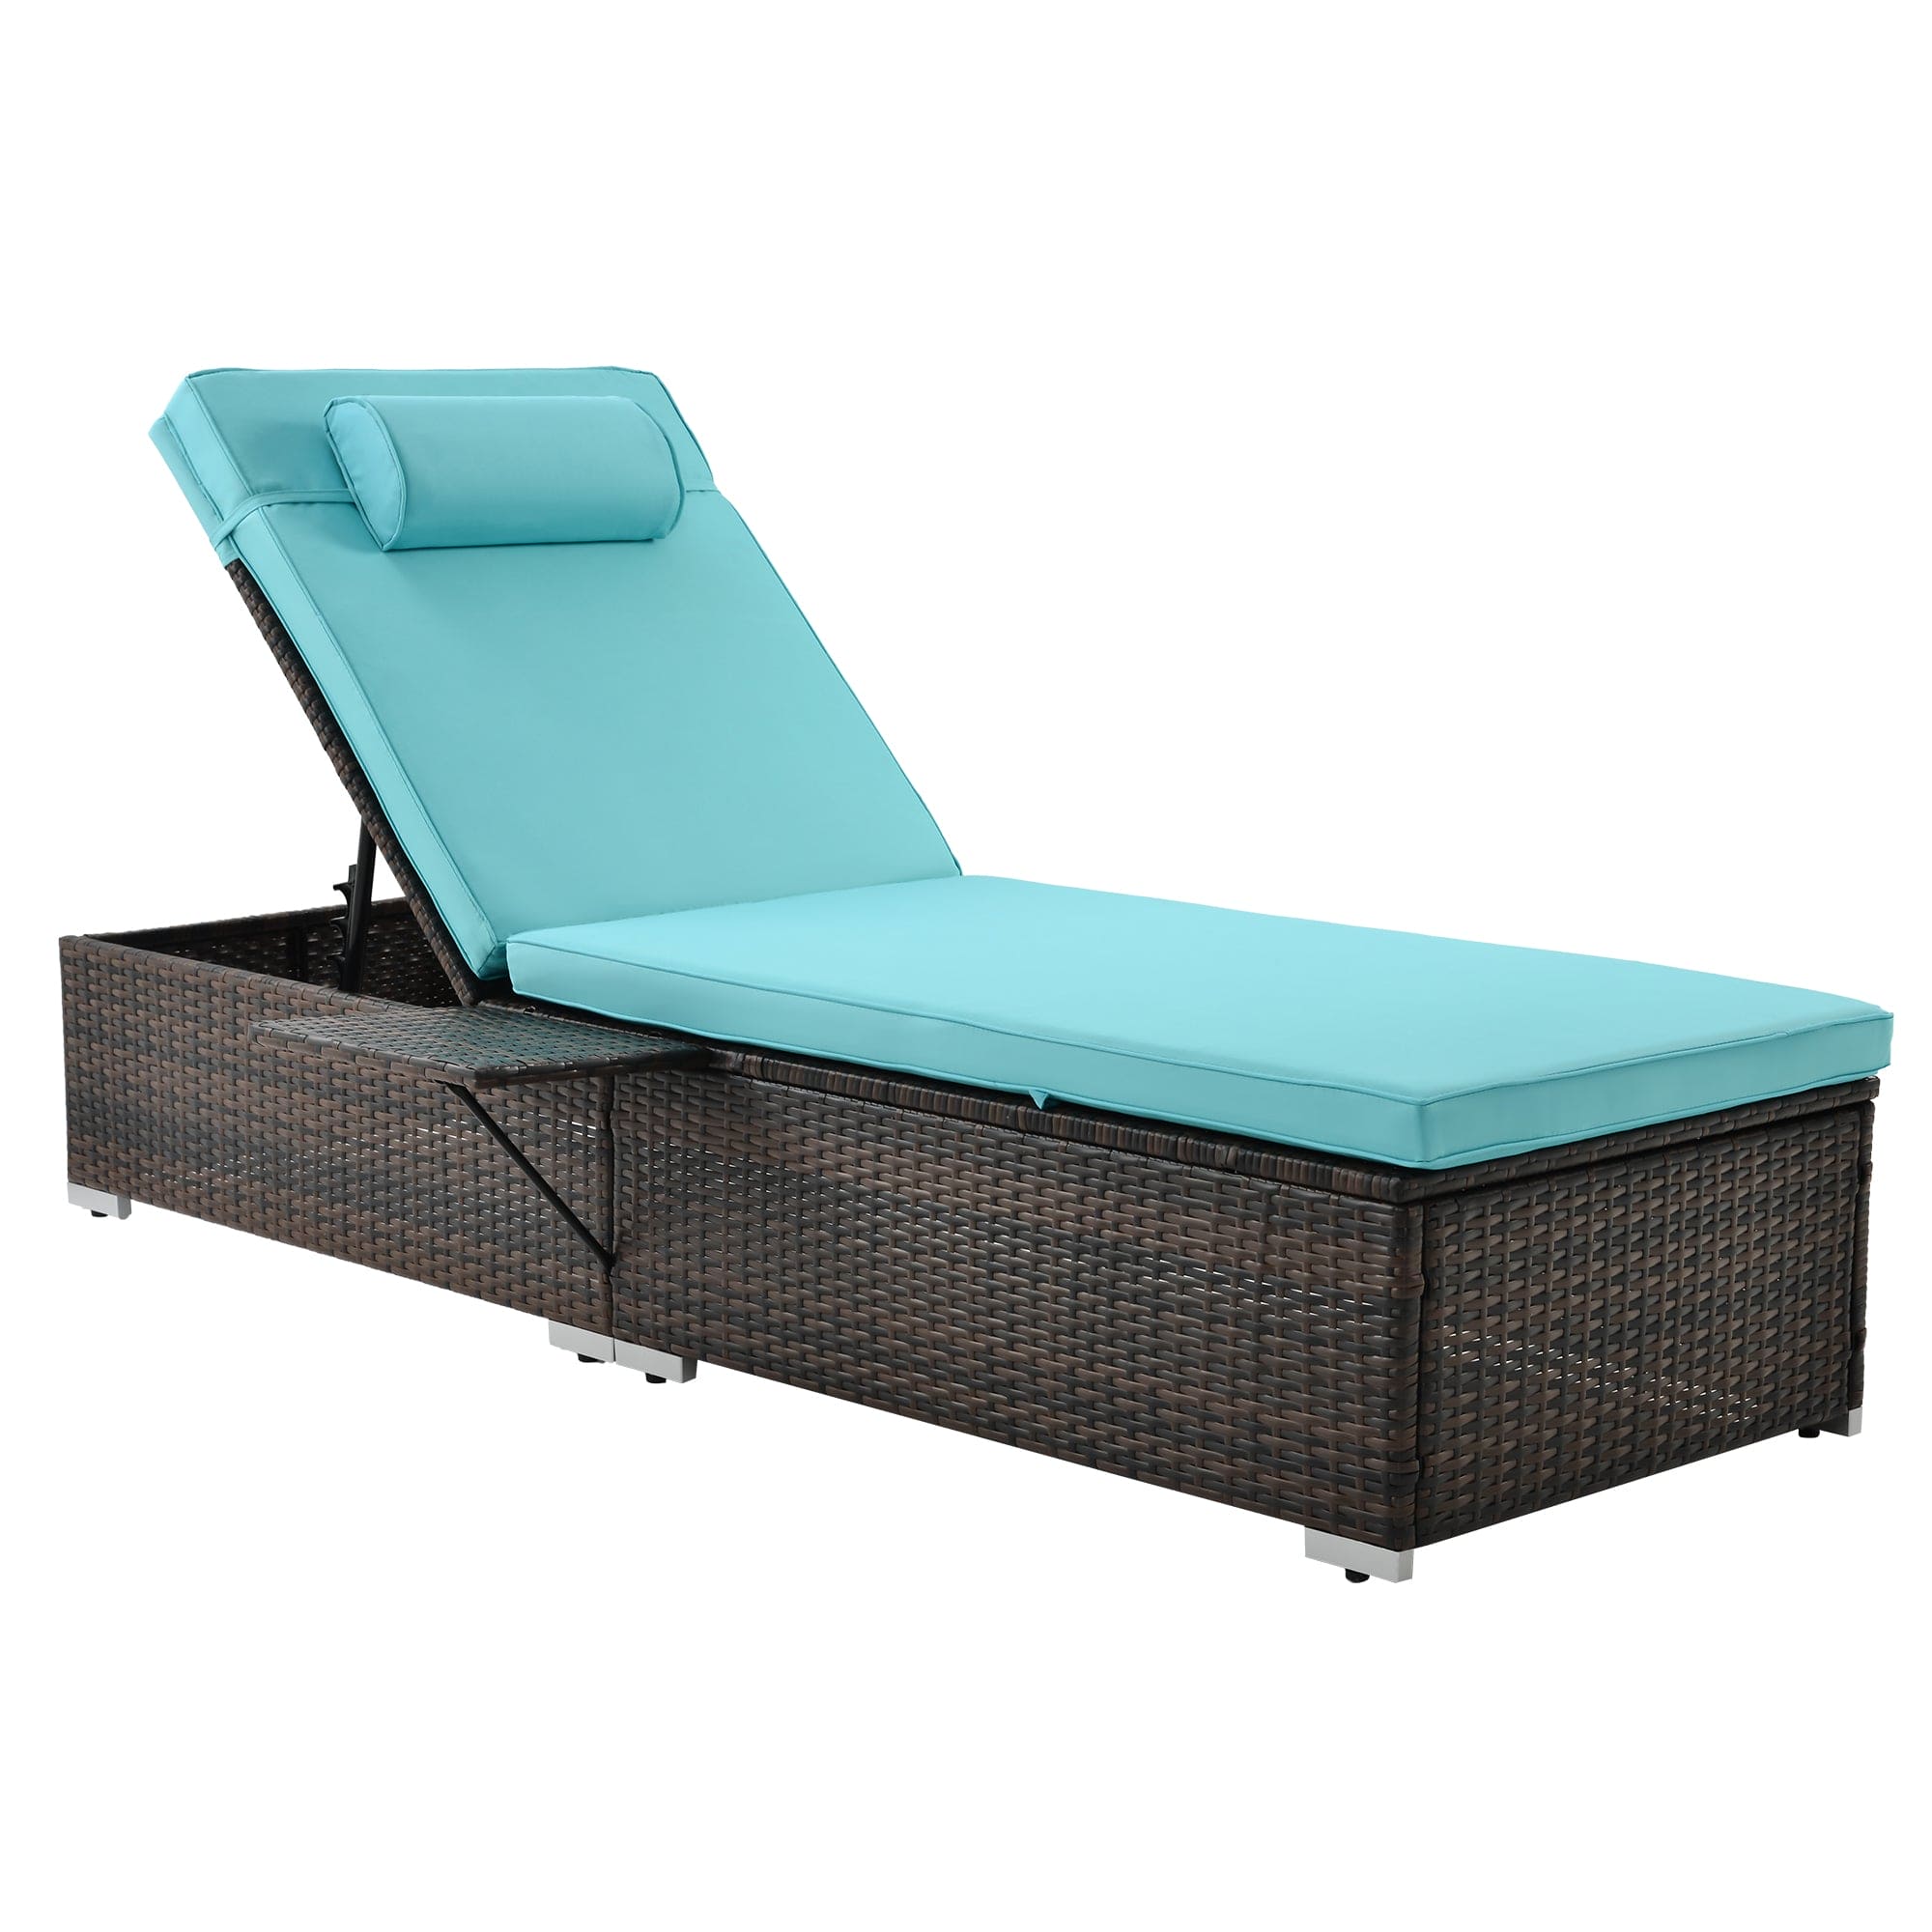 Outdoor PE Wicker Chaise Lounge - 2 Piece patio lounge chair; chase longue; lazy boy recliner;outdoor lounge chairs set of 2;beach chairs; recliner chair with side table